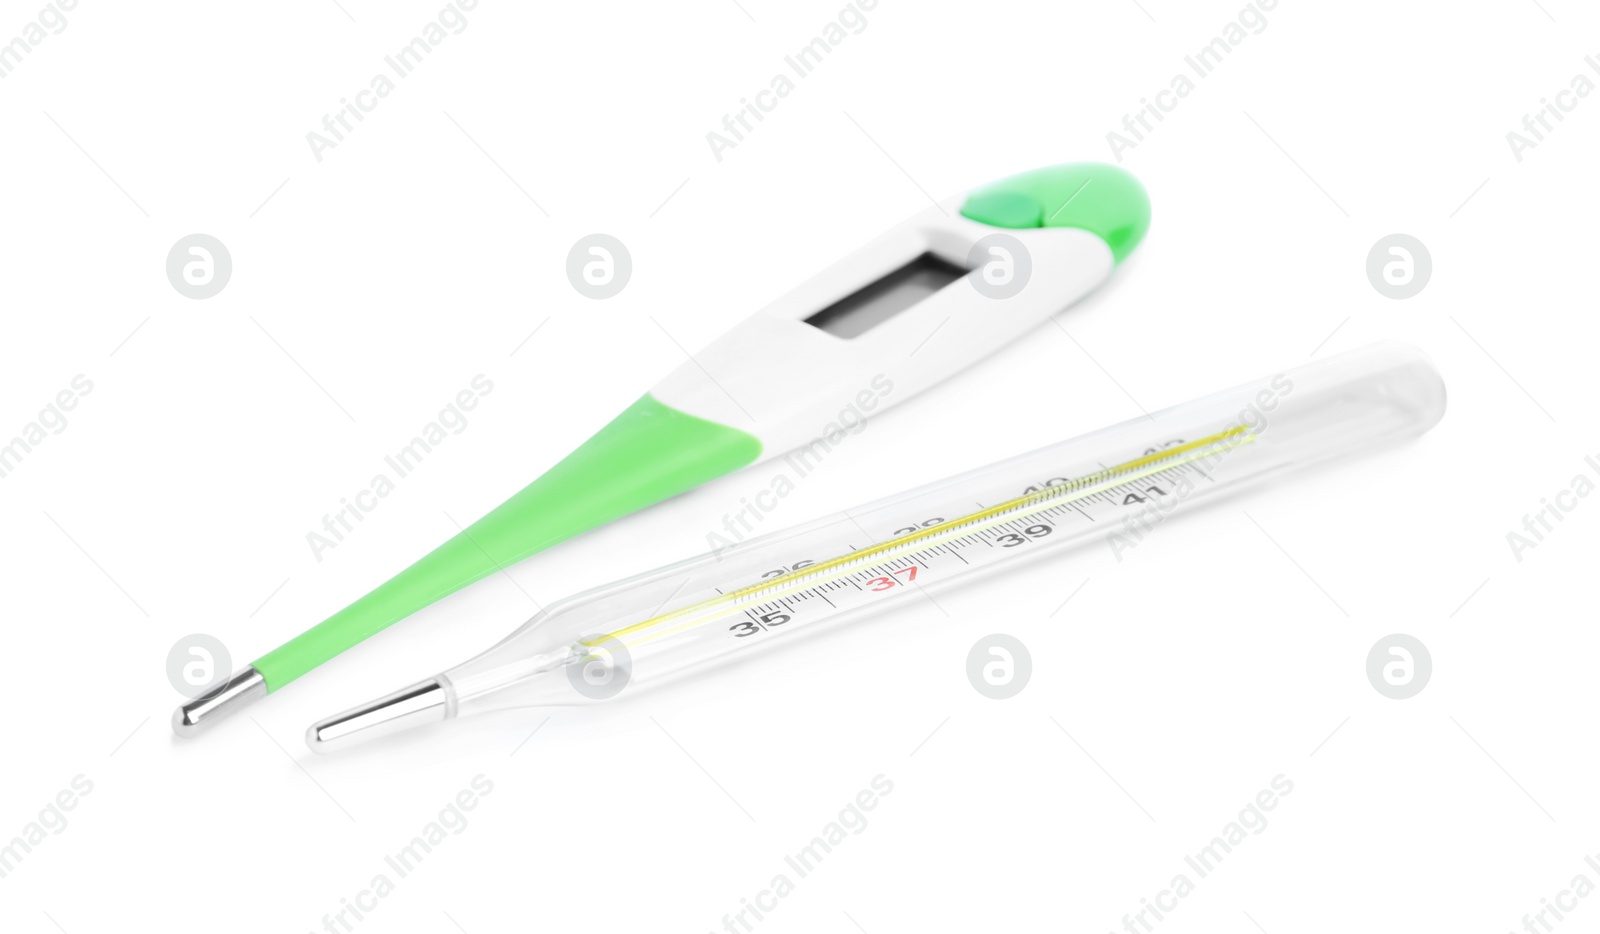 Photo of Digital and mercury thermometers on white background